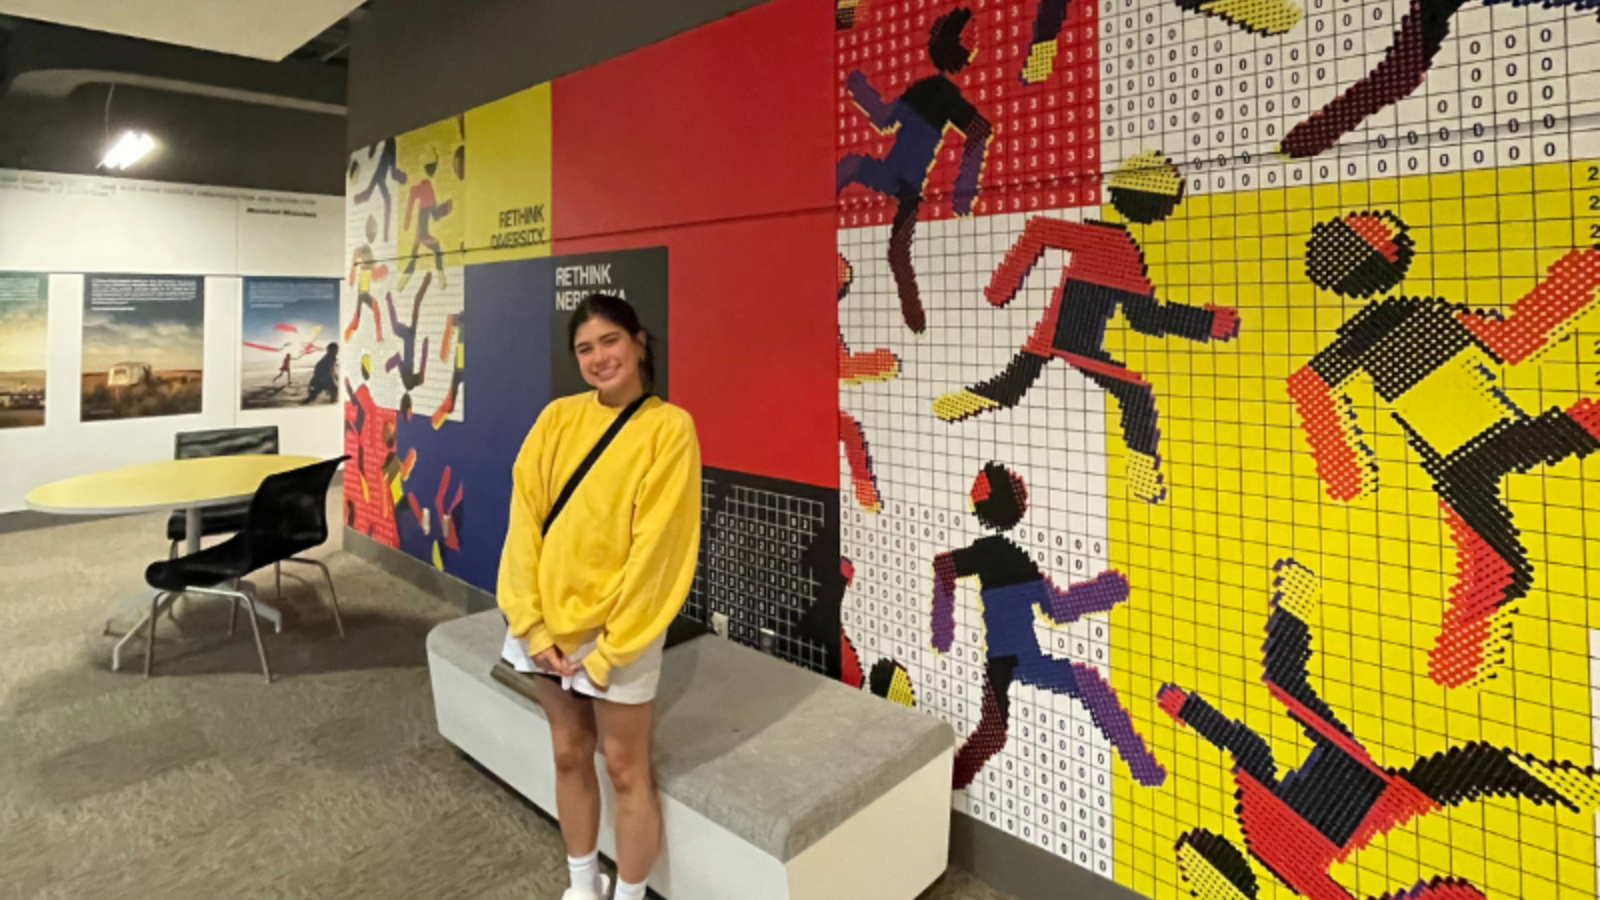 Student stands in front of mural